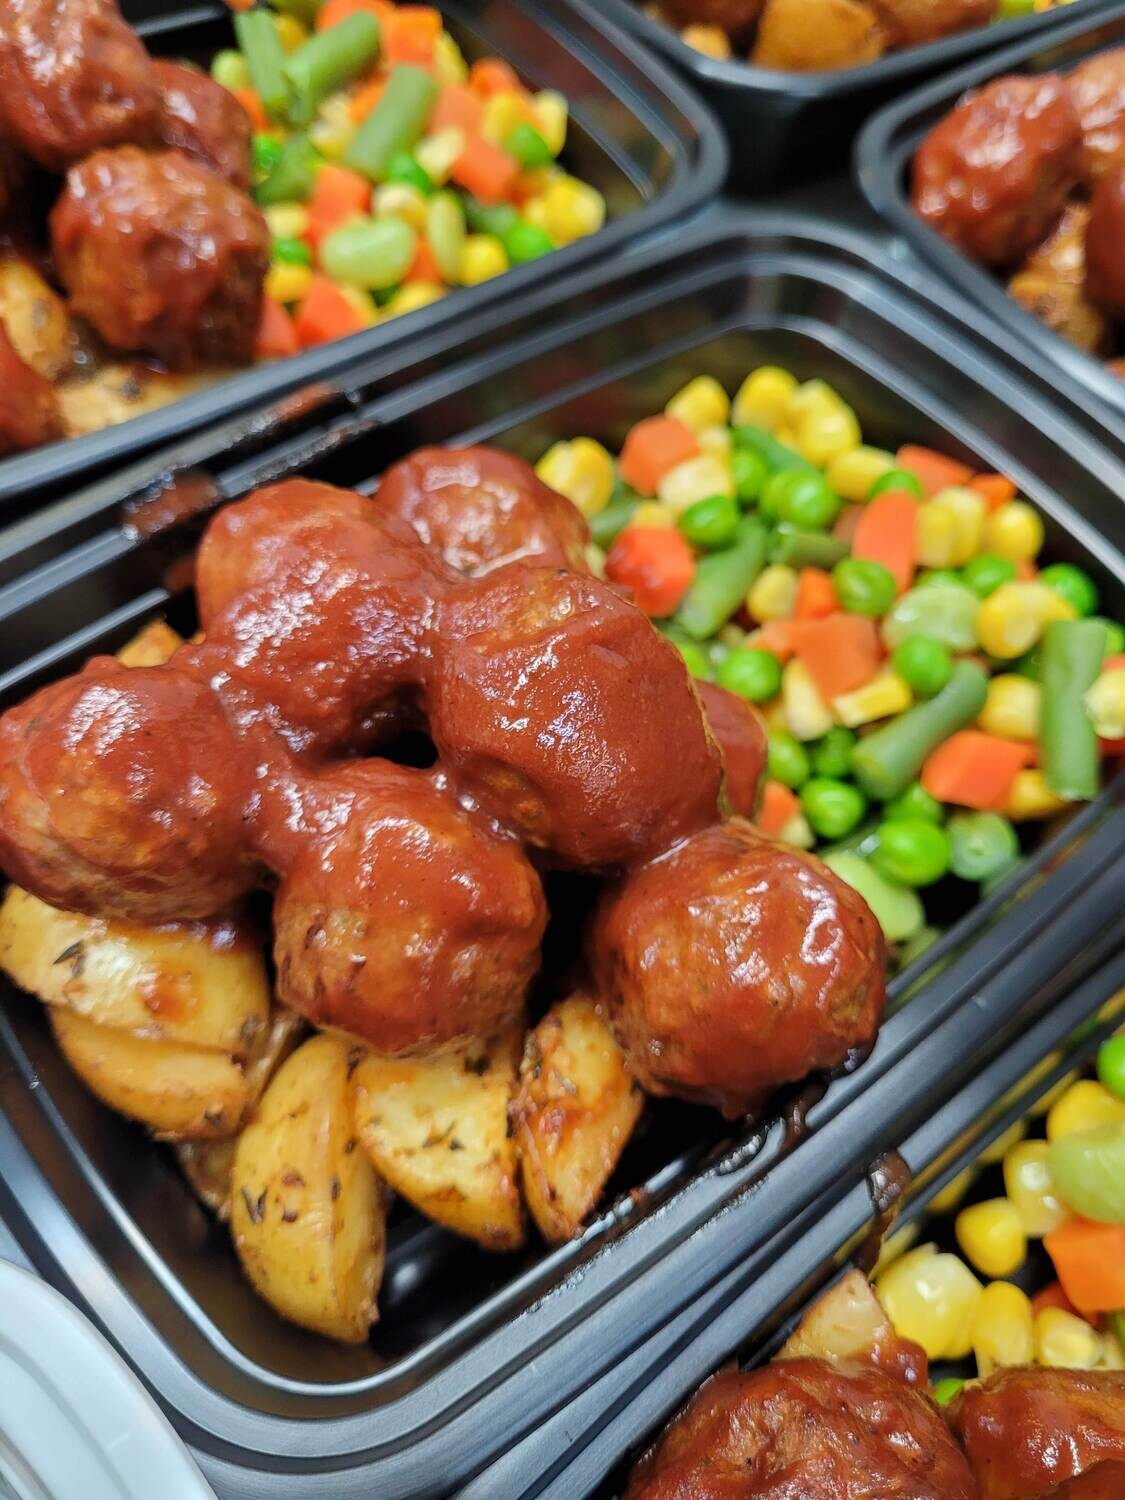 07. BBQ  Meatballs with Roasted Potatoes & Vegetables